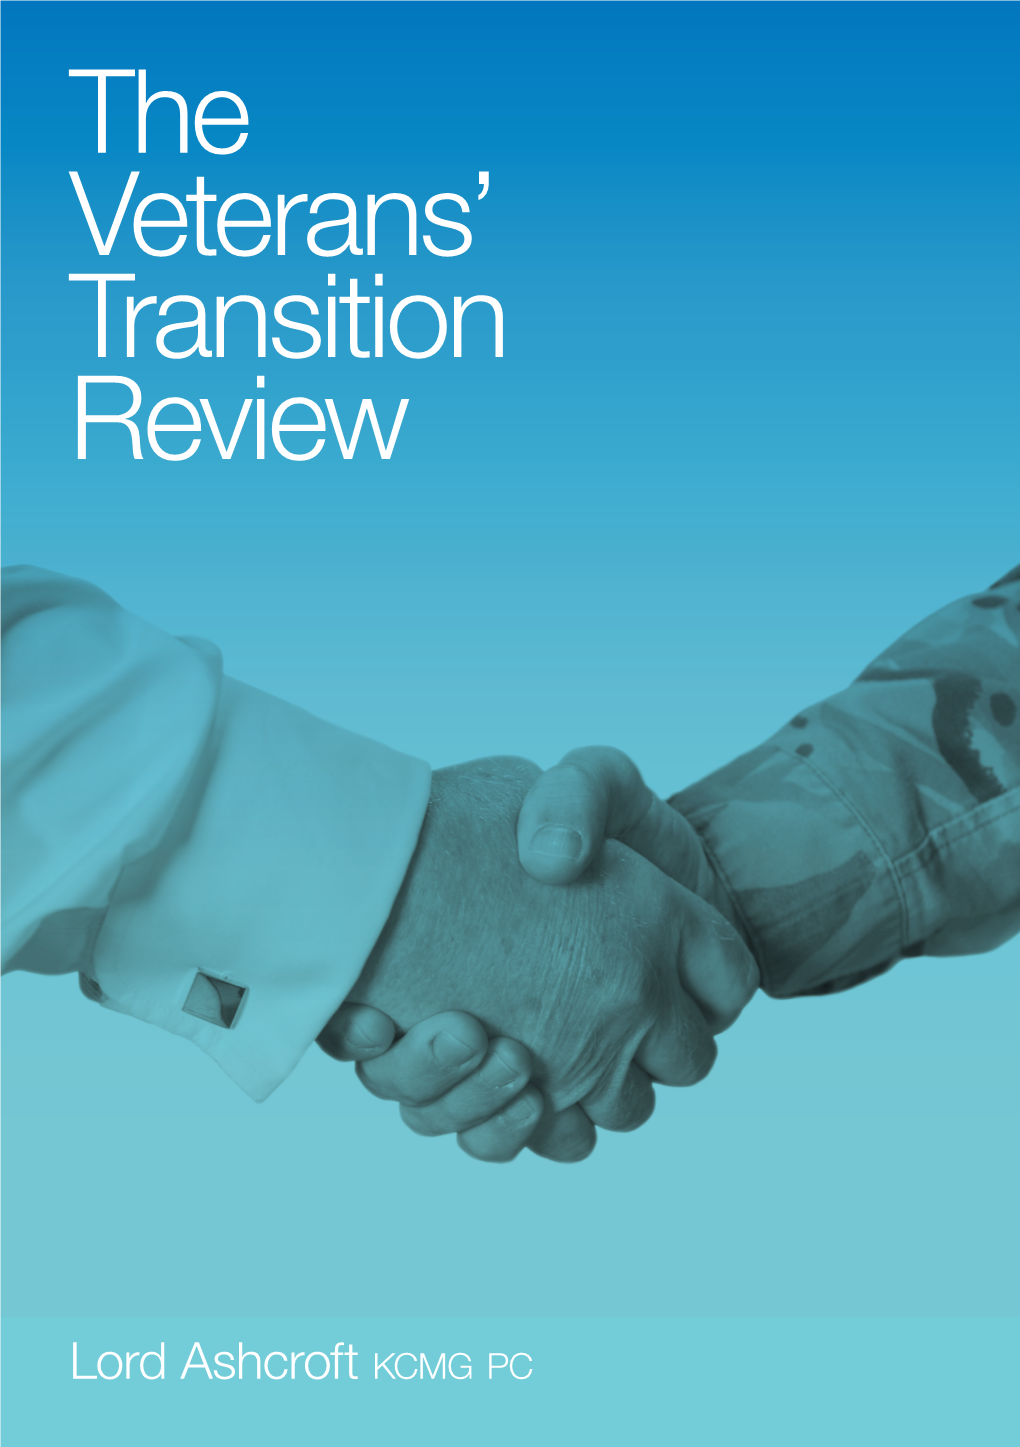 The Veterans' Transition Review